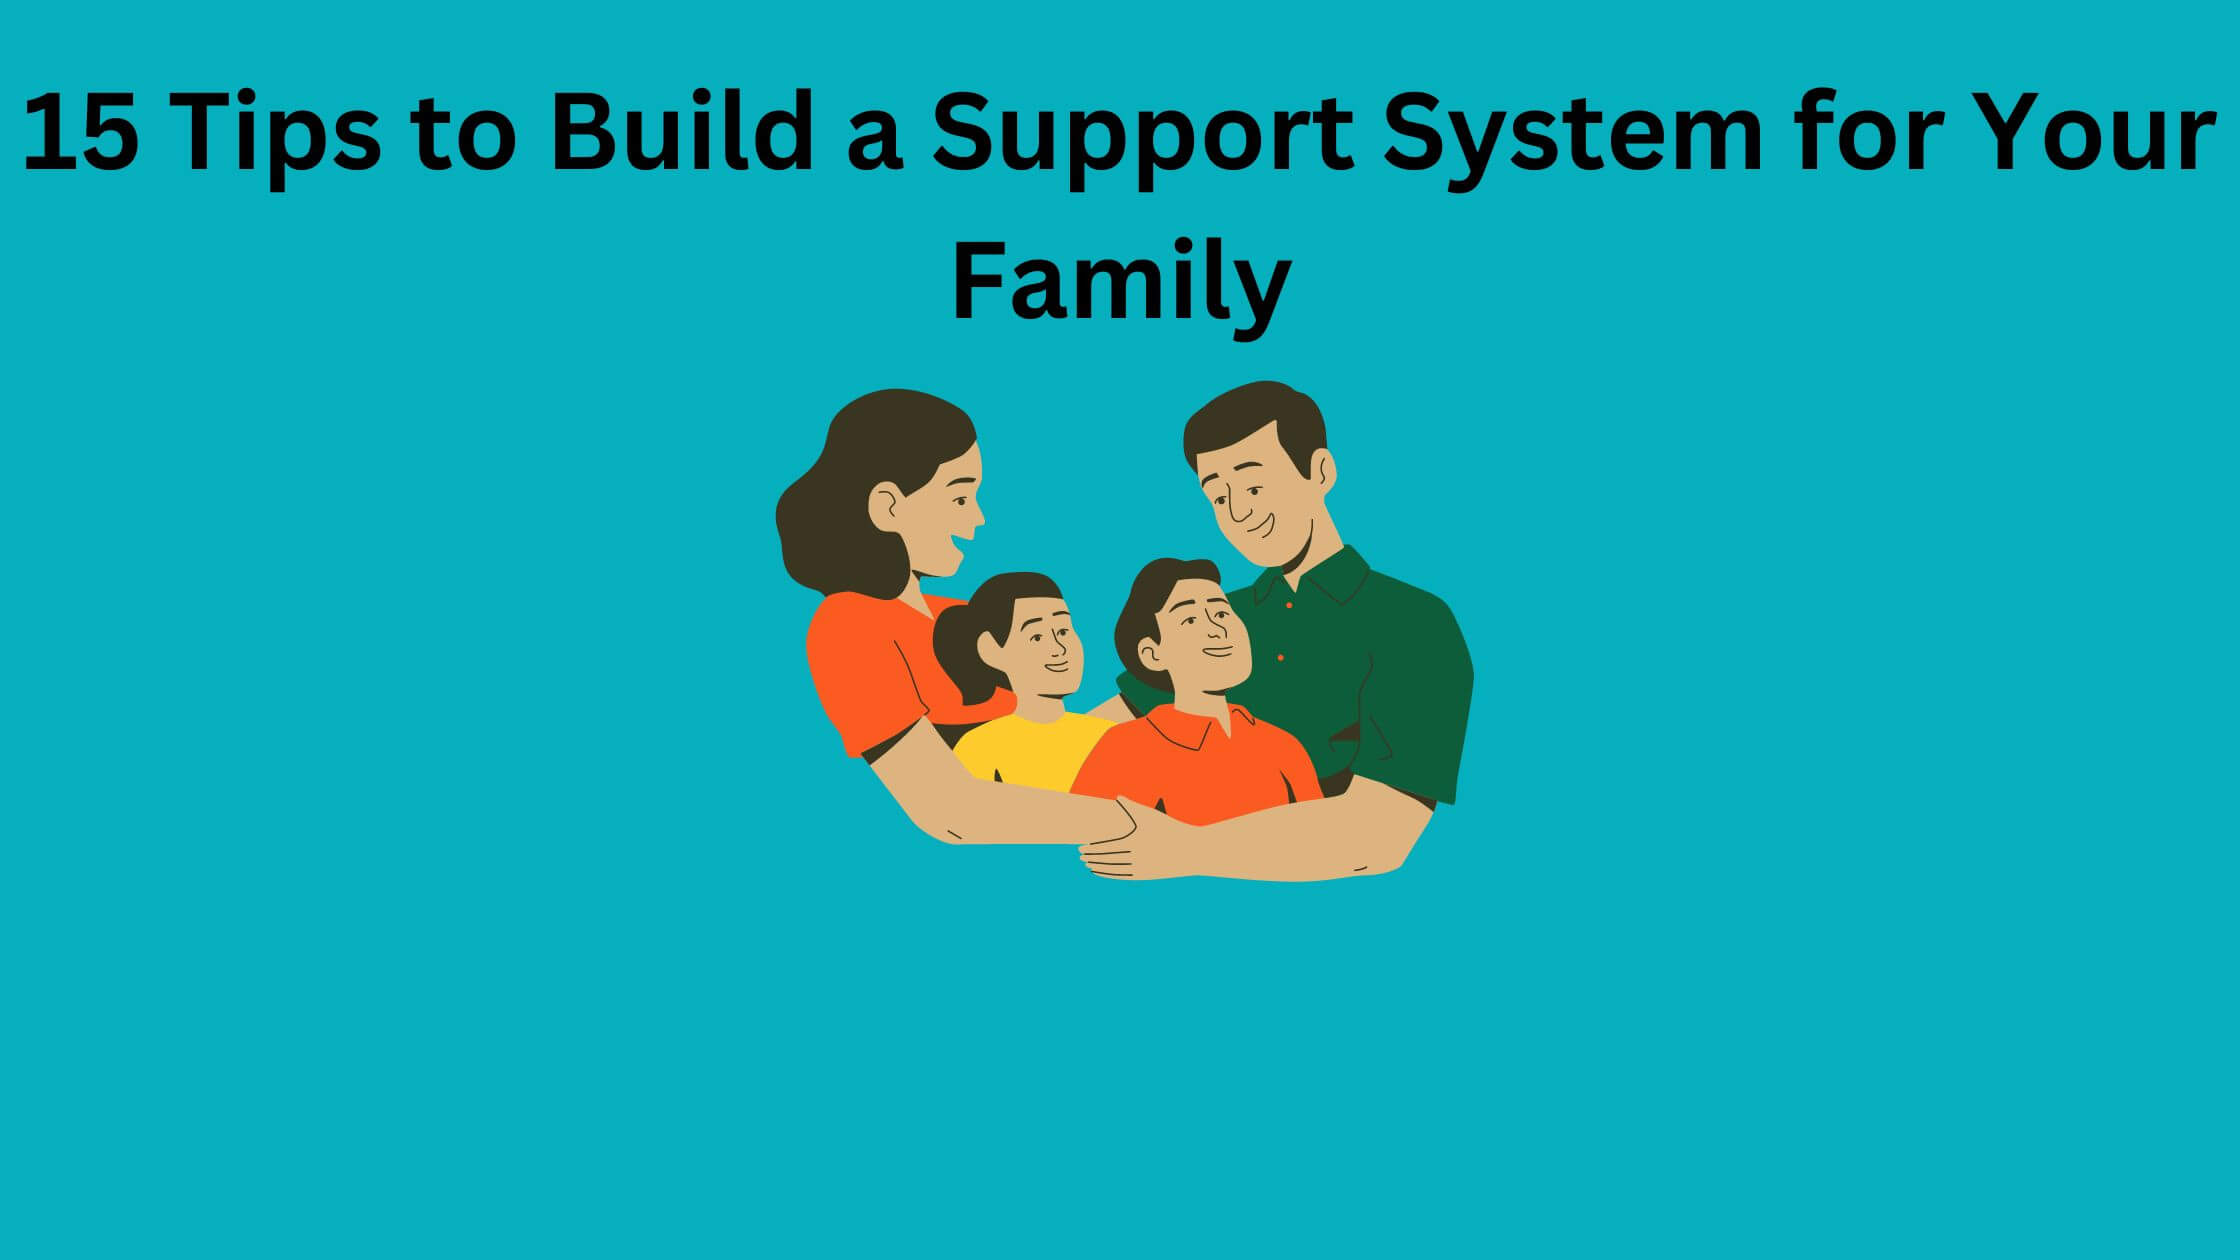 How to build a Support System for the Family: 15 Ways to Empower Your Loved Ones